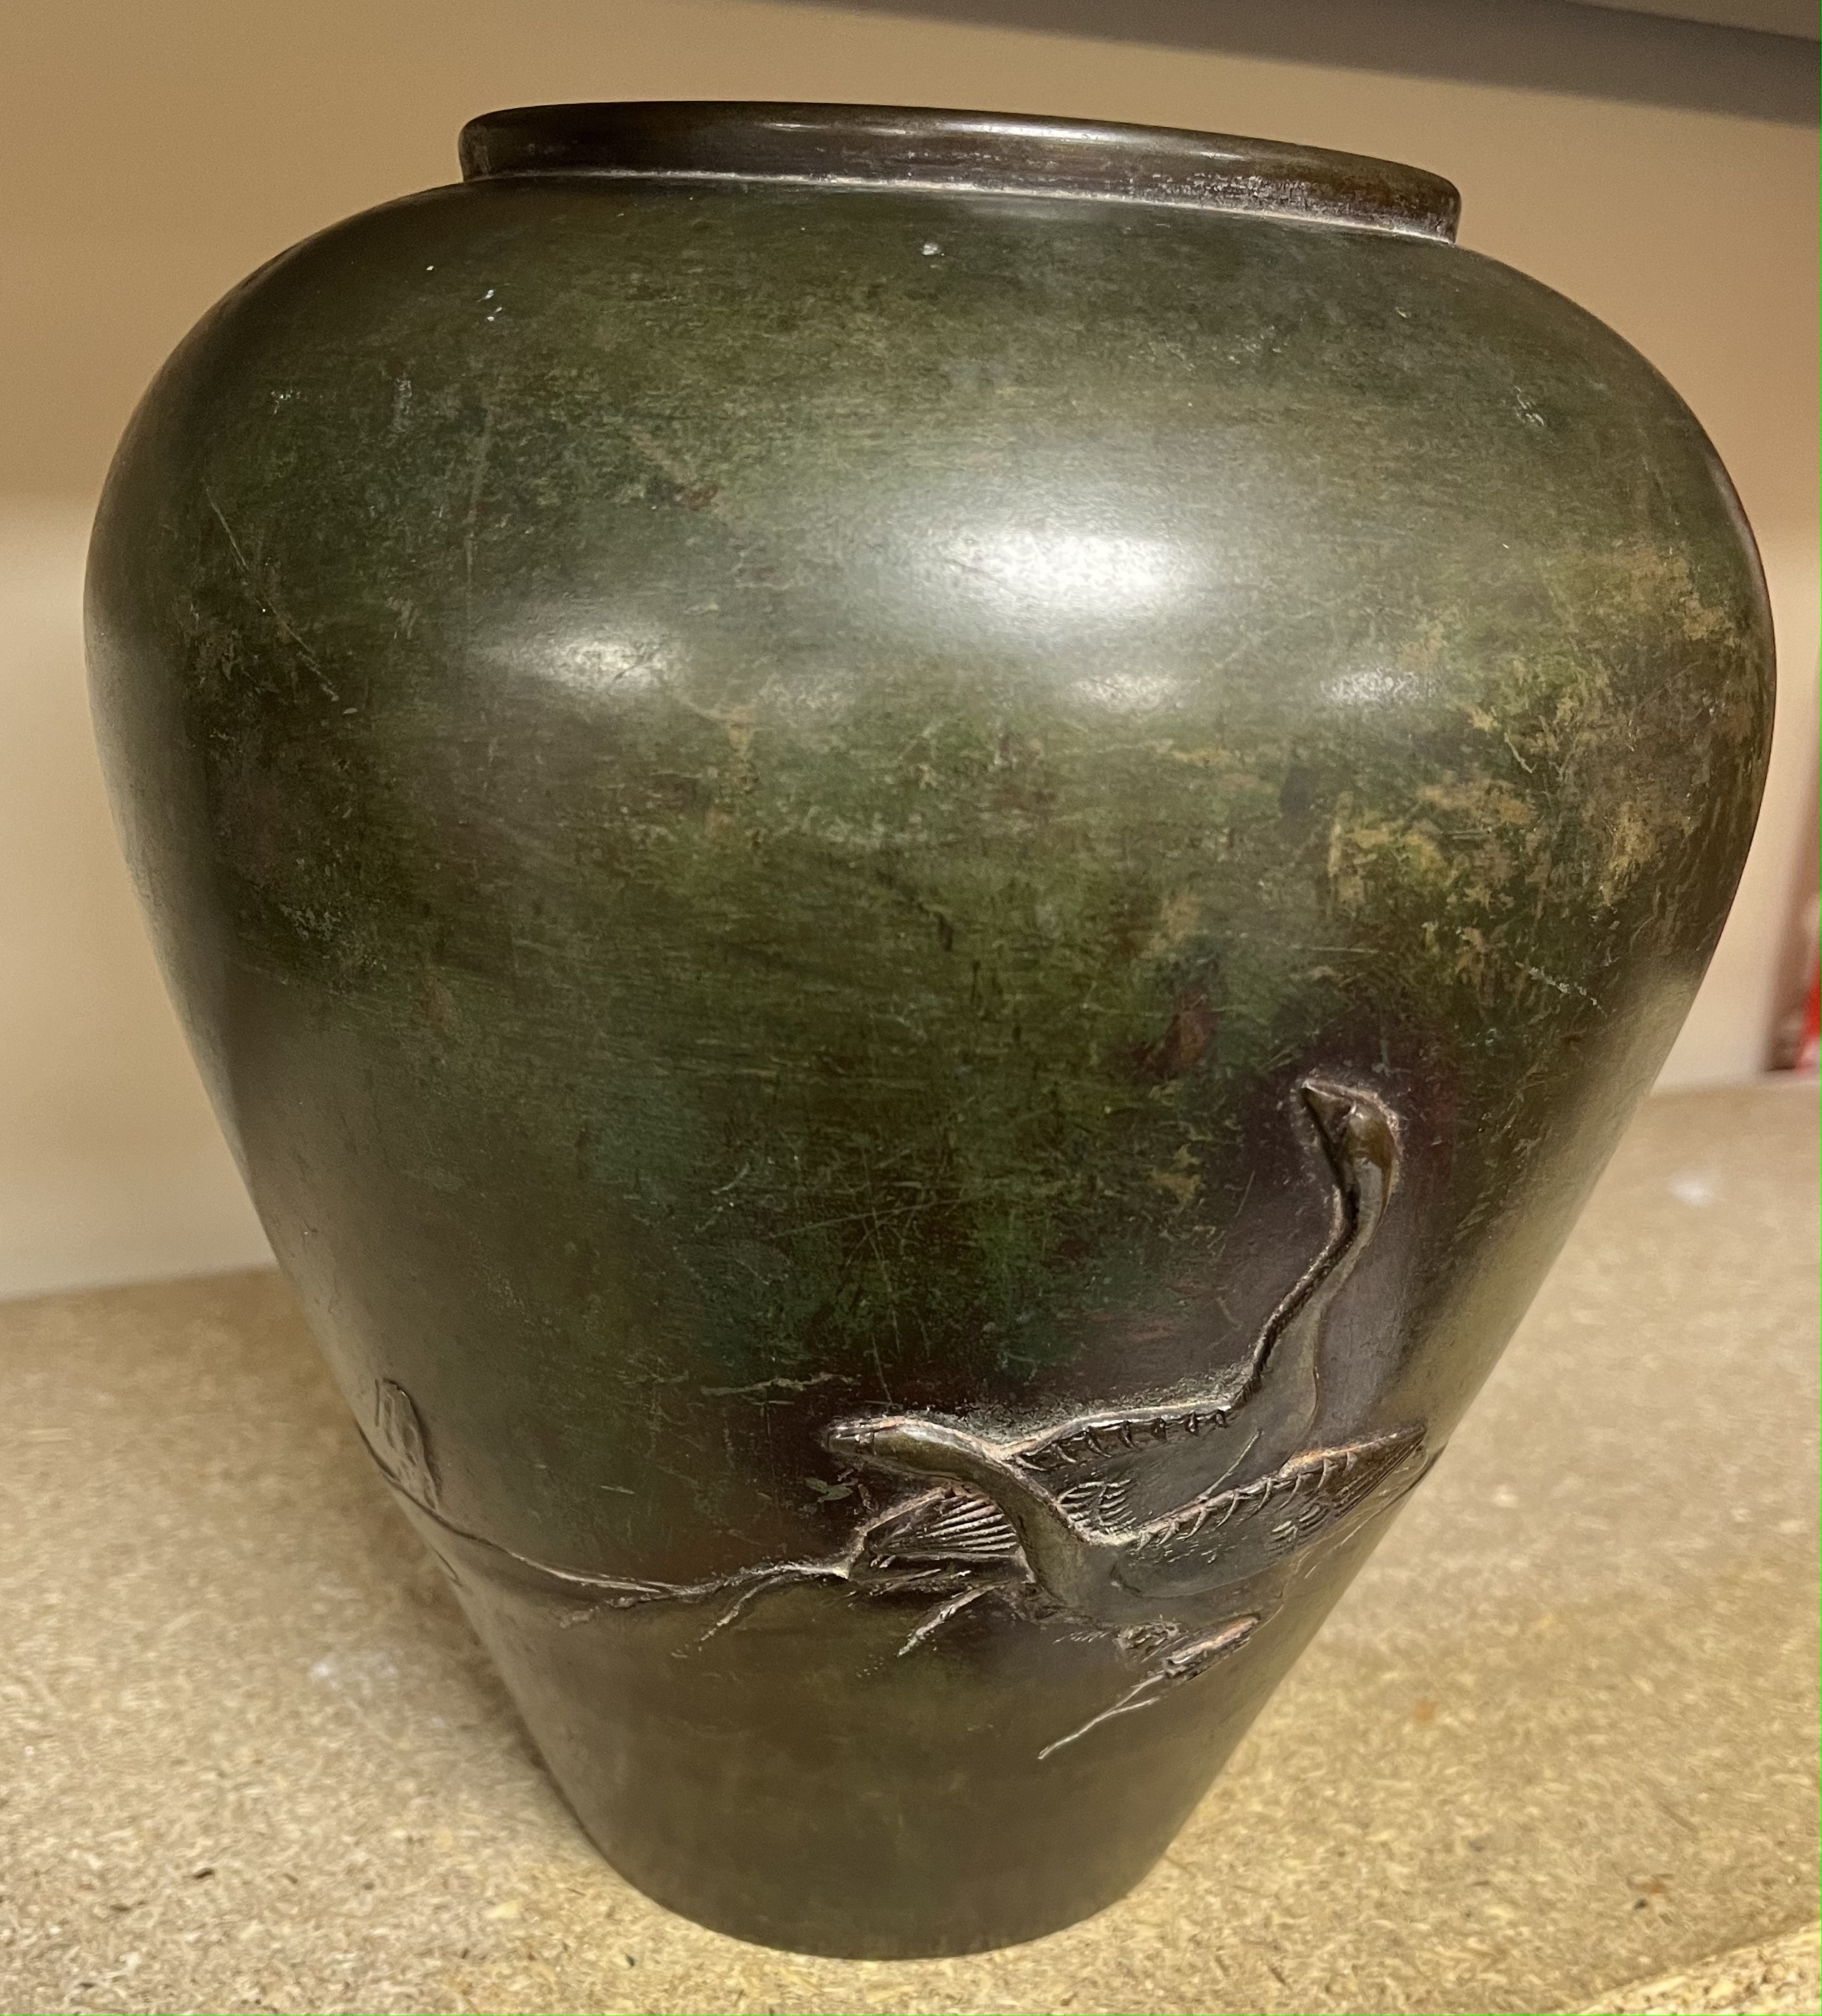 A JAPANESE BRONZE VASE WITH GEESE, MEIJI PERIOD, 1868 – 1912 - Image 4 of 8